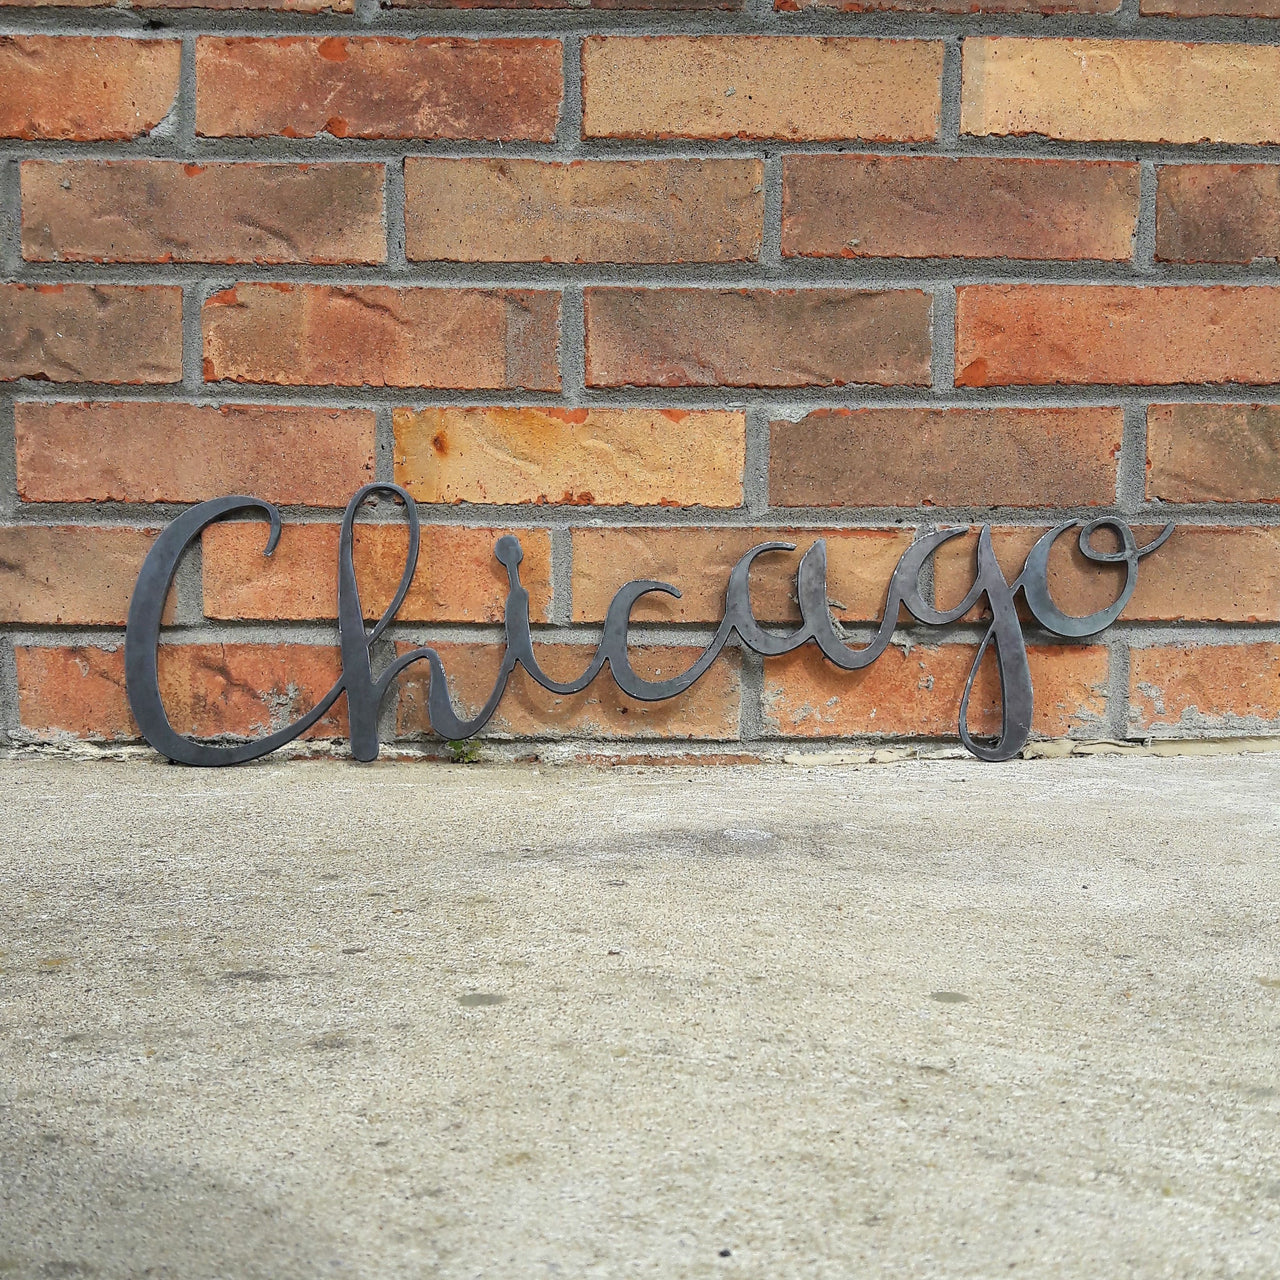 This metal home decor is in the shape of a cursive word and reads, "Chicago".